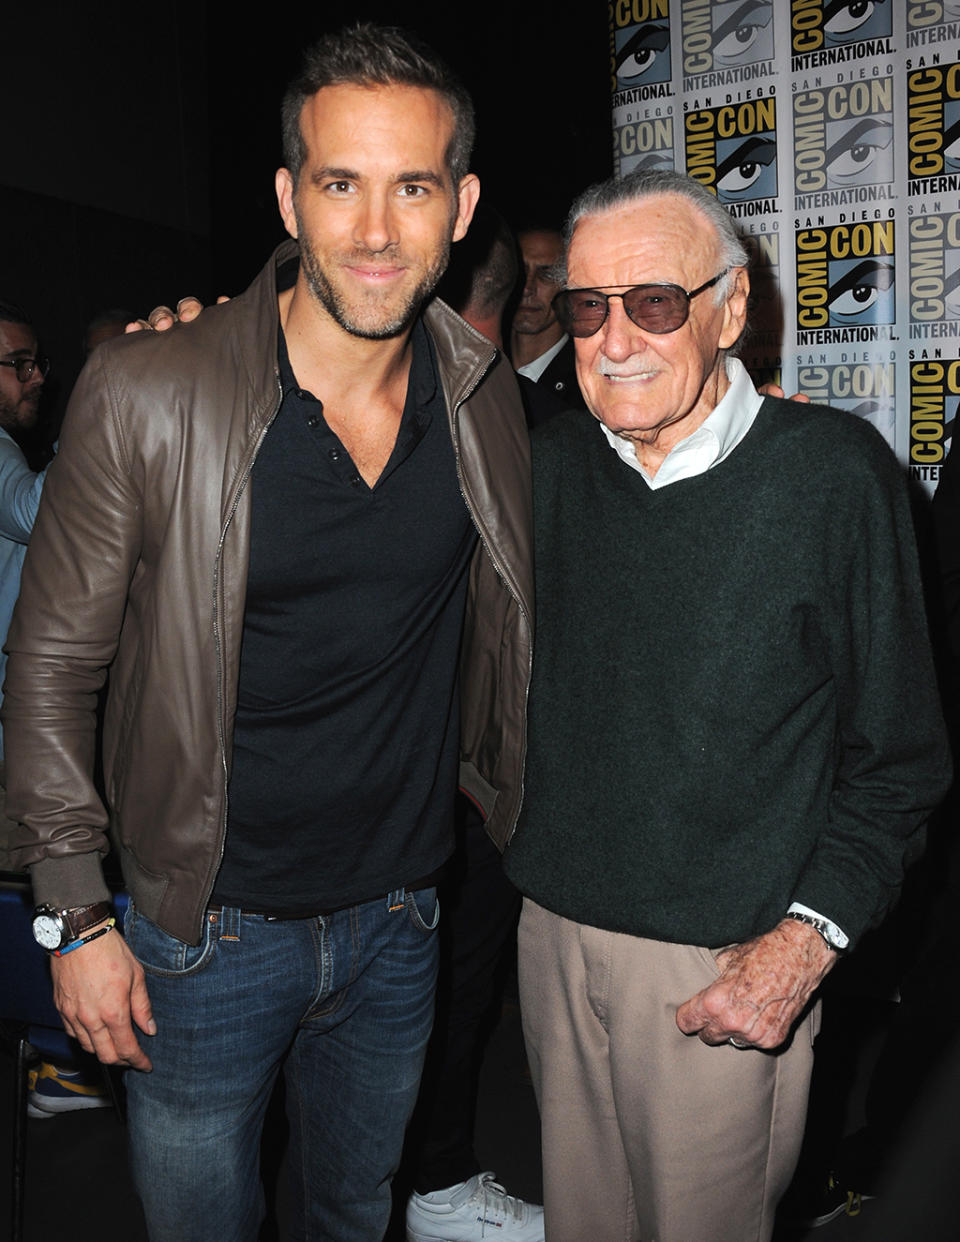 <p>Reynolds with Marvel comic book legend Stan Lee at the 20th Century Fox panel in San Diego. (Photo: Albert L. Ortega/Getty Images) </p>